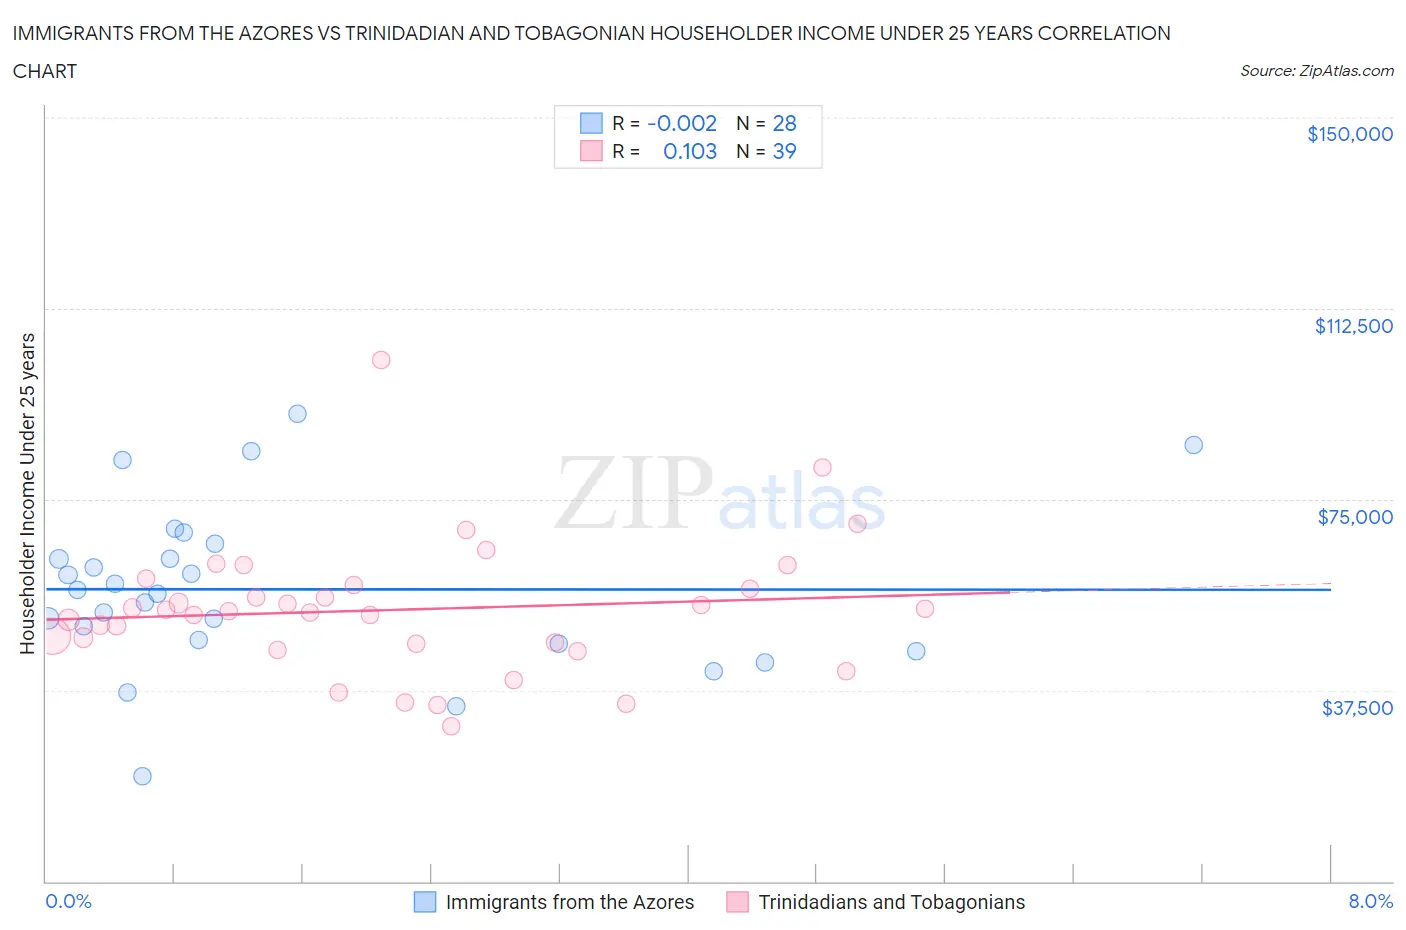 Immigrants from the Azores vs Trinidadian and Tobagonian Householder Income Under 25 years